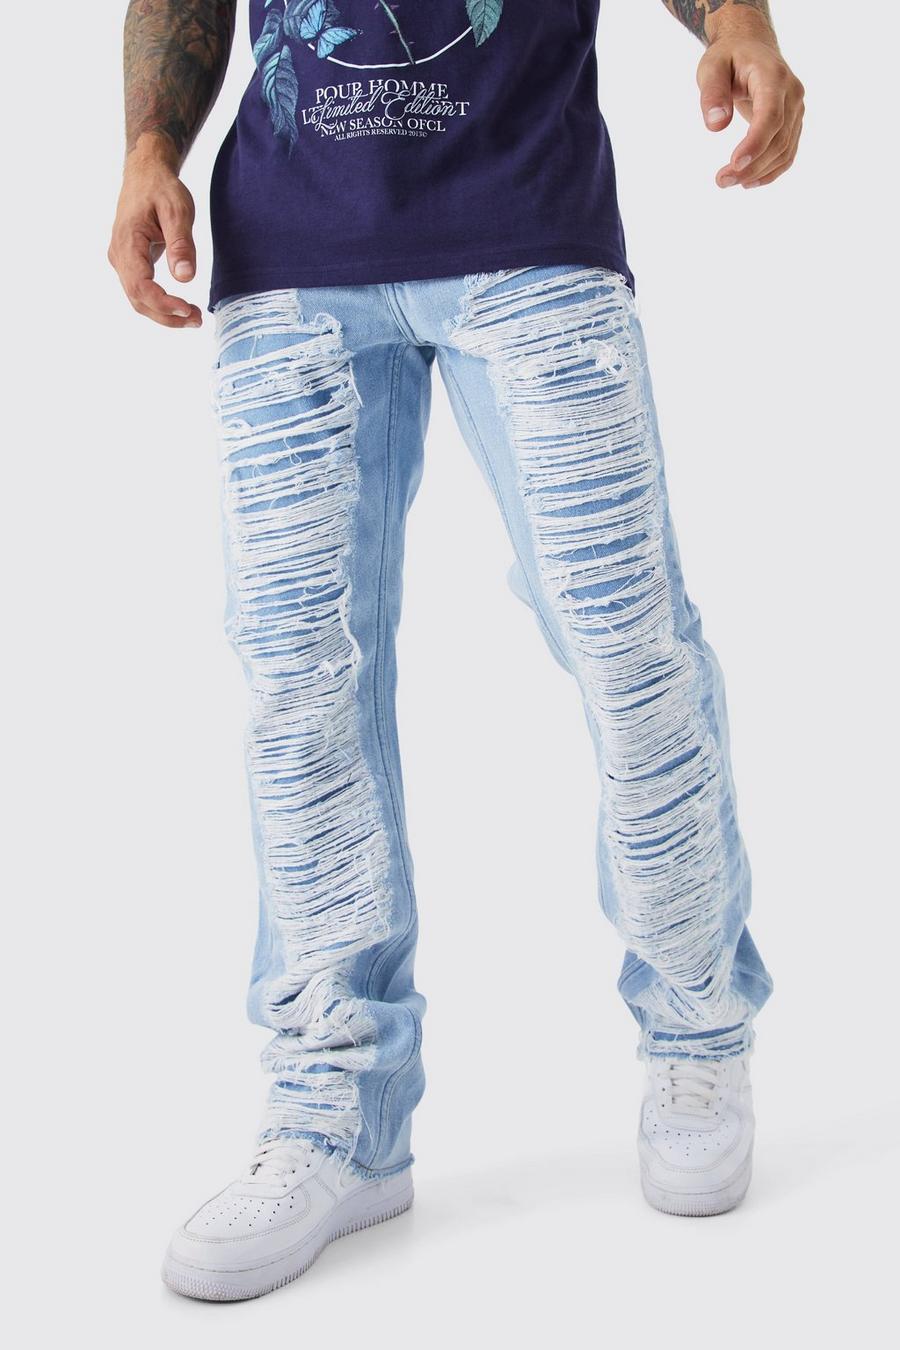 Ice blue Slim Rigid Flare Extreme Ripped Jeans